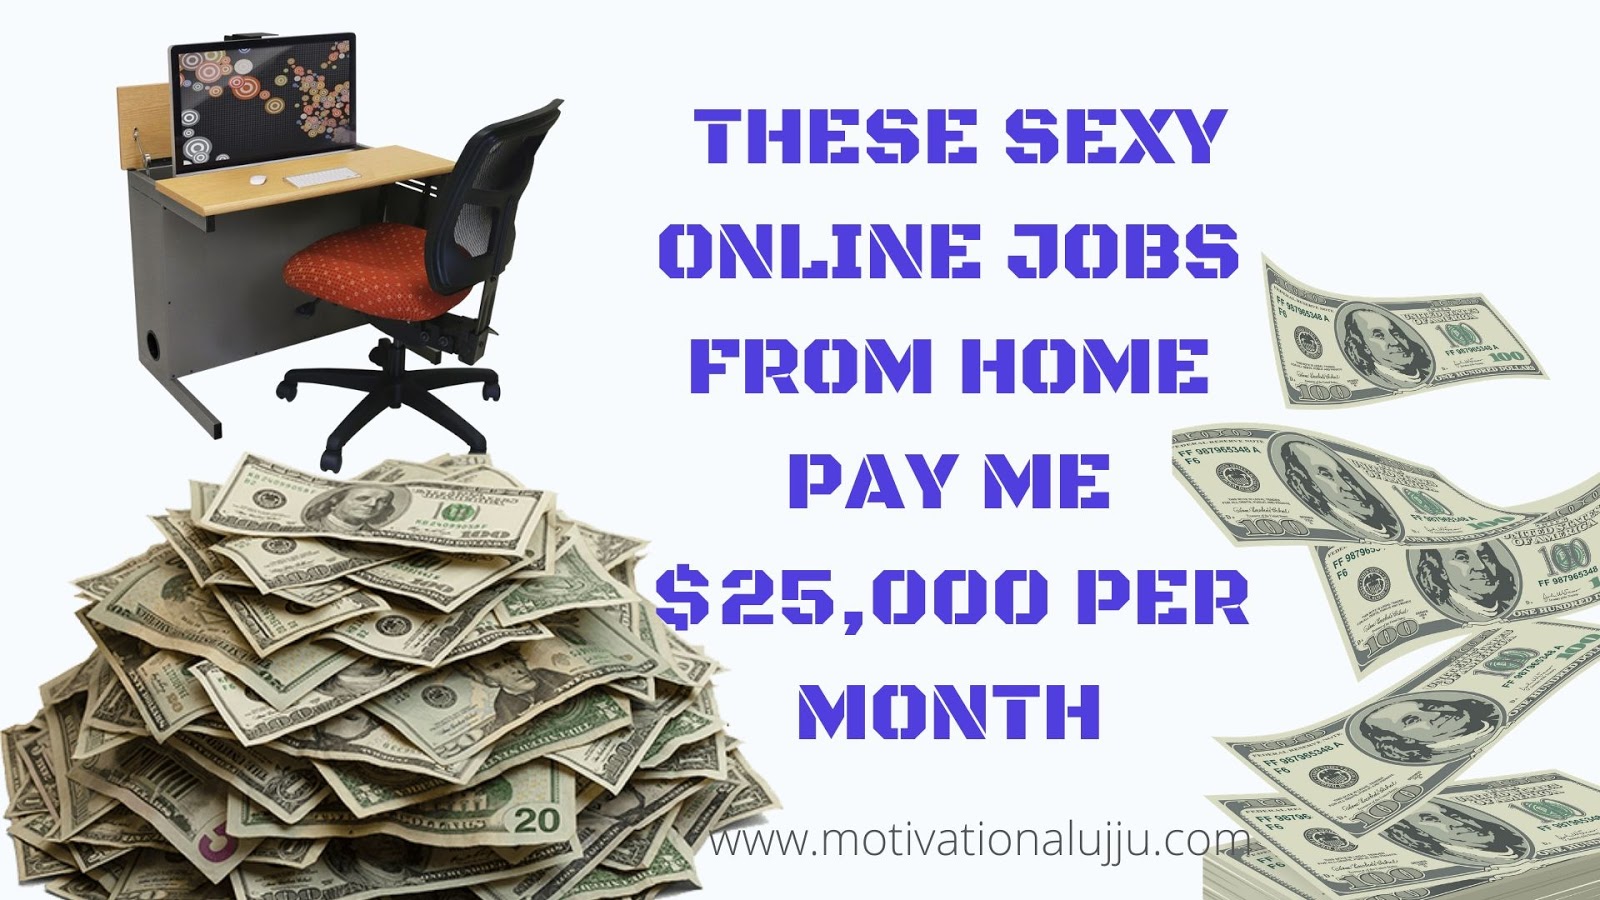 These Sexy Online Jobs From Home Pay Me 25 000 Per Month Motivationalujju Study Motivation Self Motivation Online Money Motivational Tips And Tricks Motivationalujju,Potato Bread Sandwich